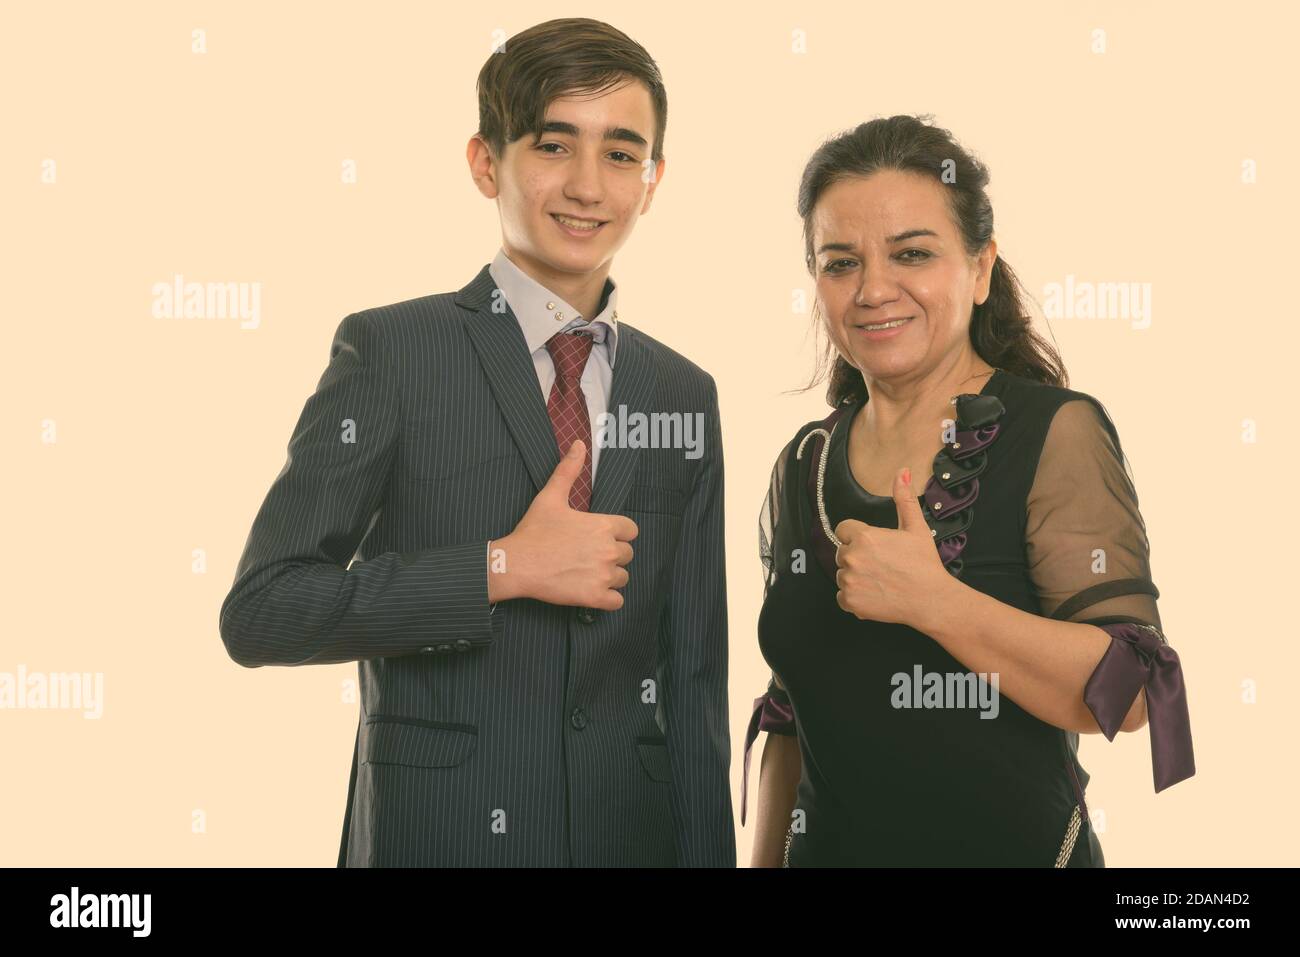 Studio shot of happy young Persian teenage businessman and mature Persian woman smiling while giving thumb up together Stock Photo